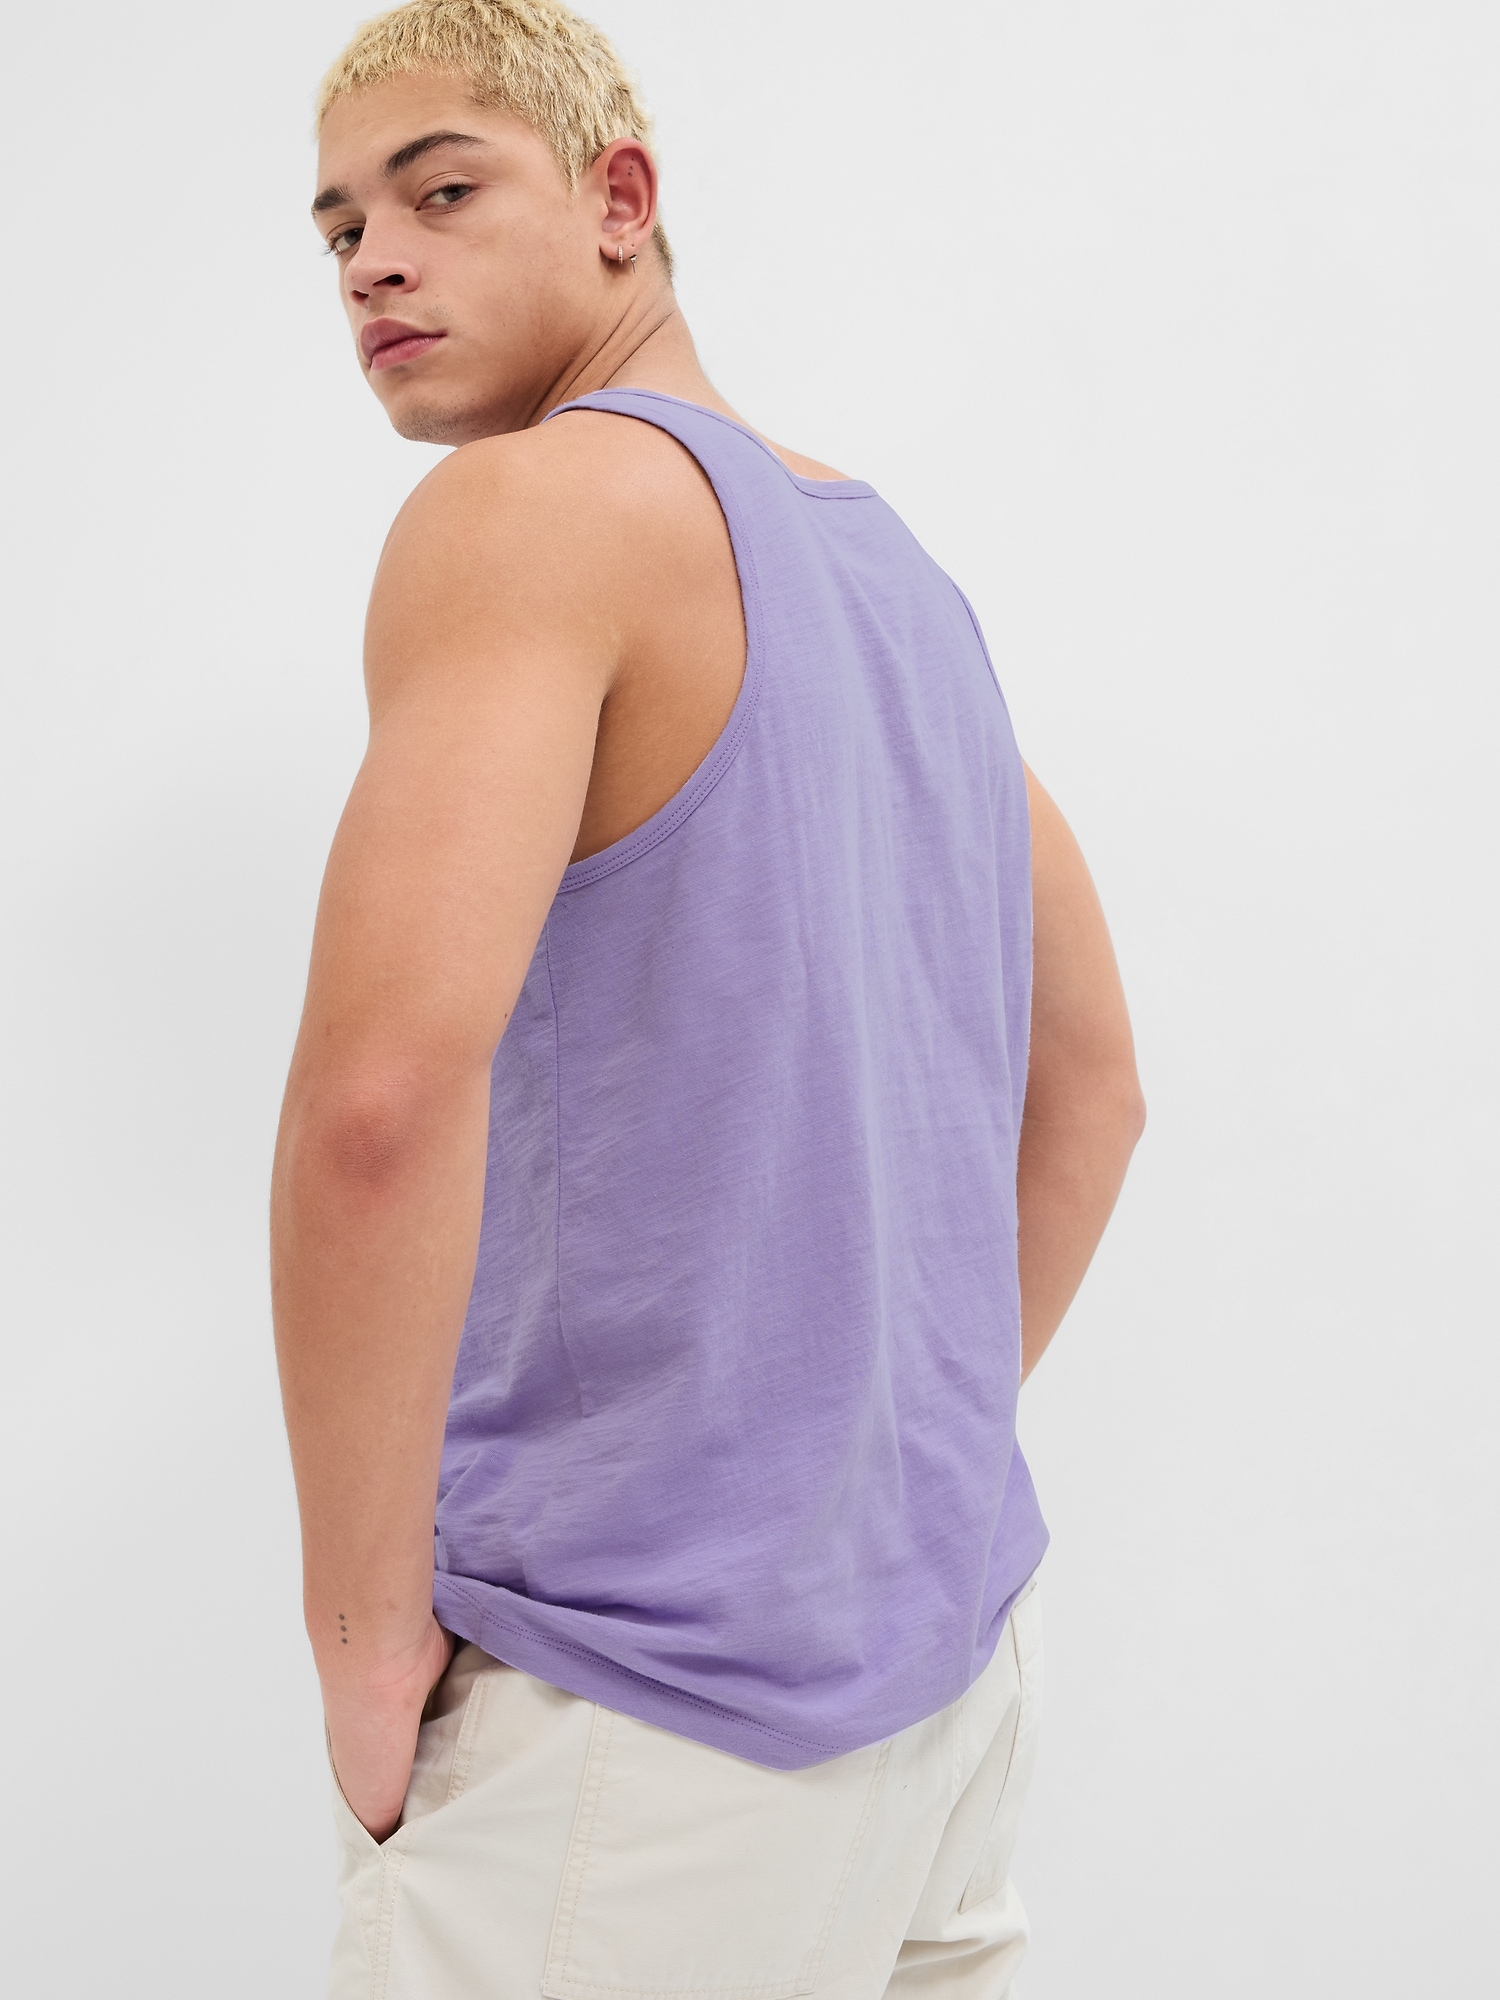 Lived-In Pocket Tank Top | Gap Factory